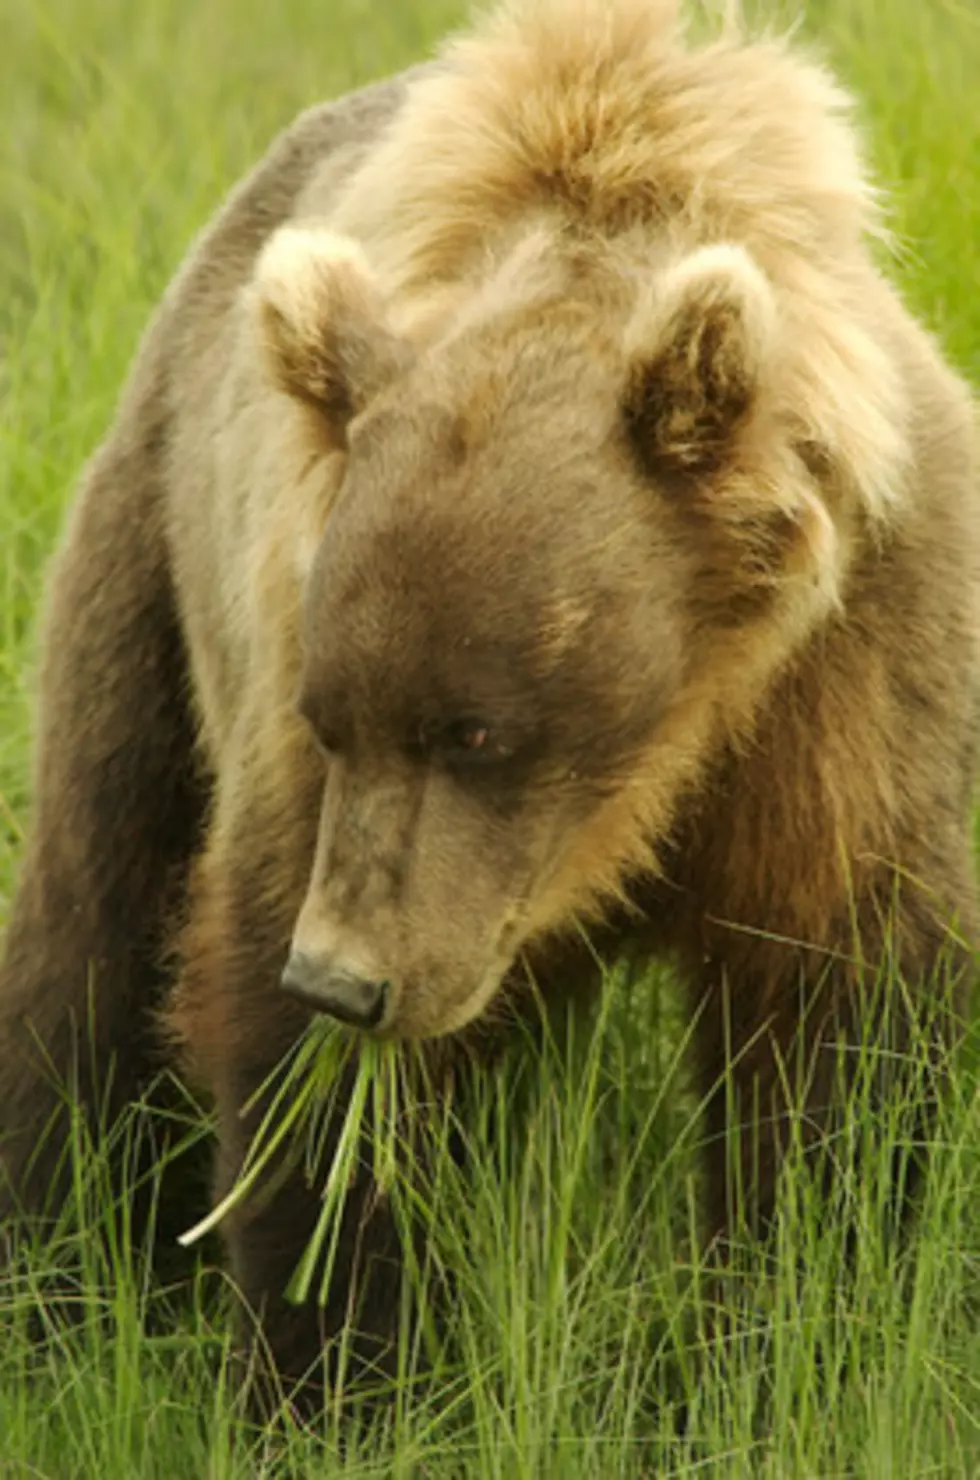 Feds Look to Maintain Yellowstone Bear Numbers